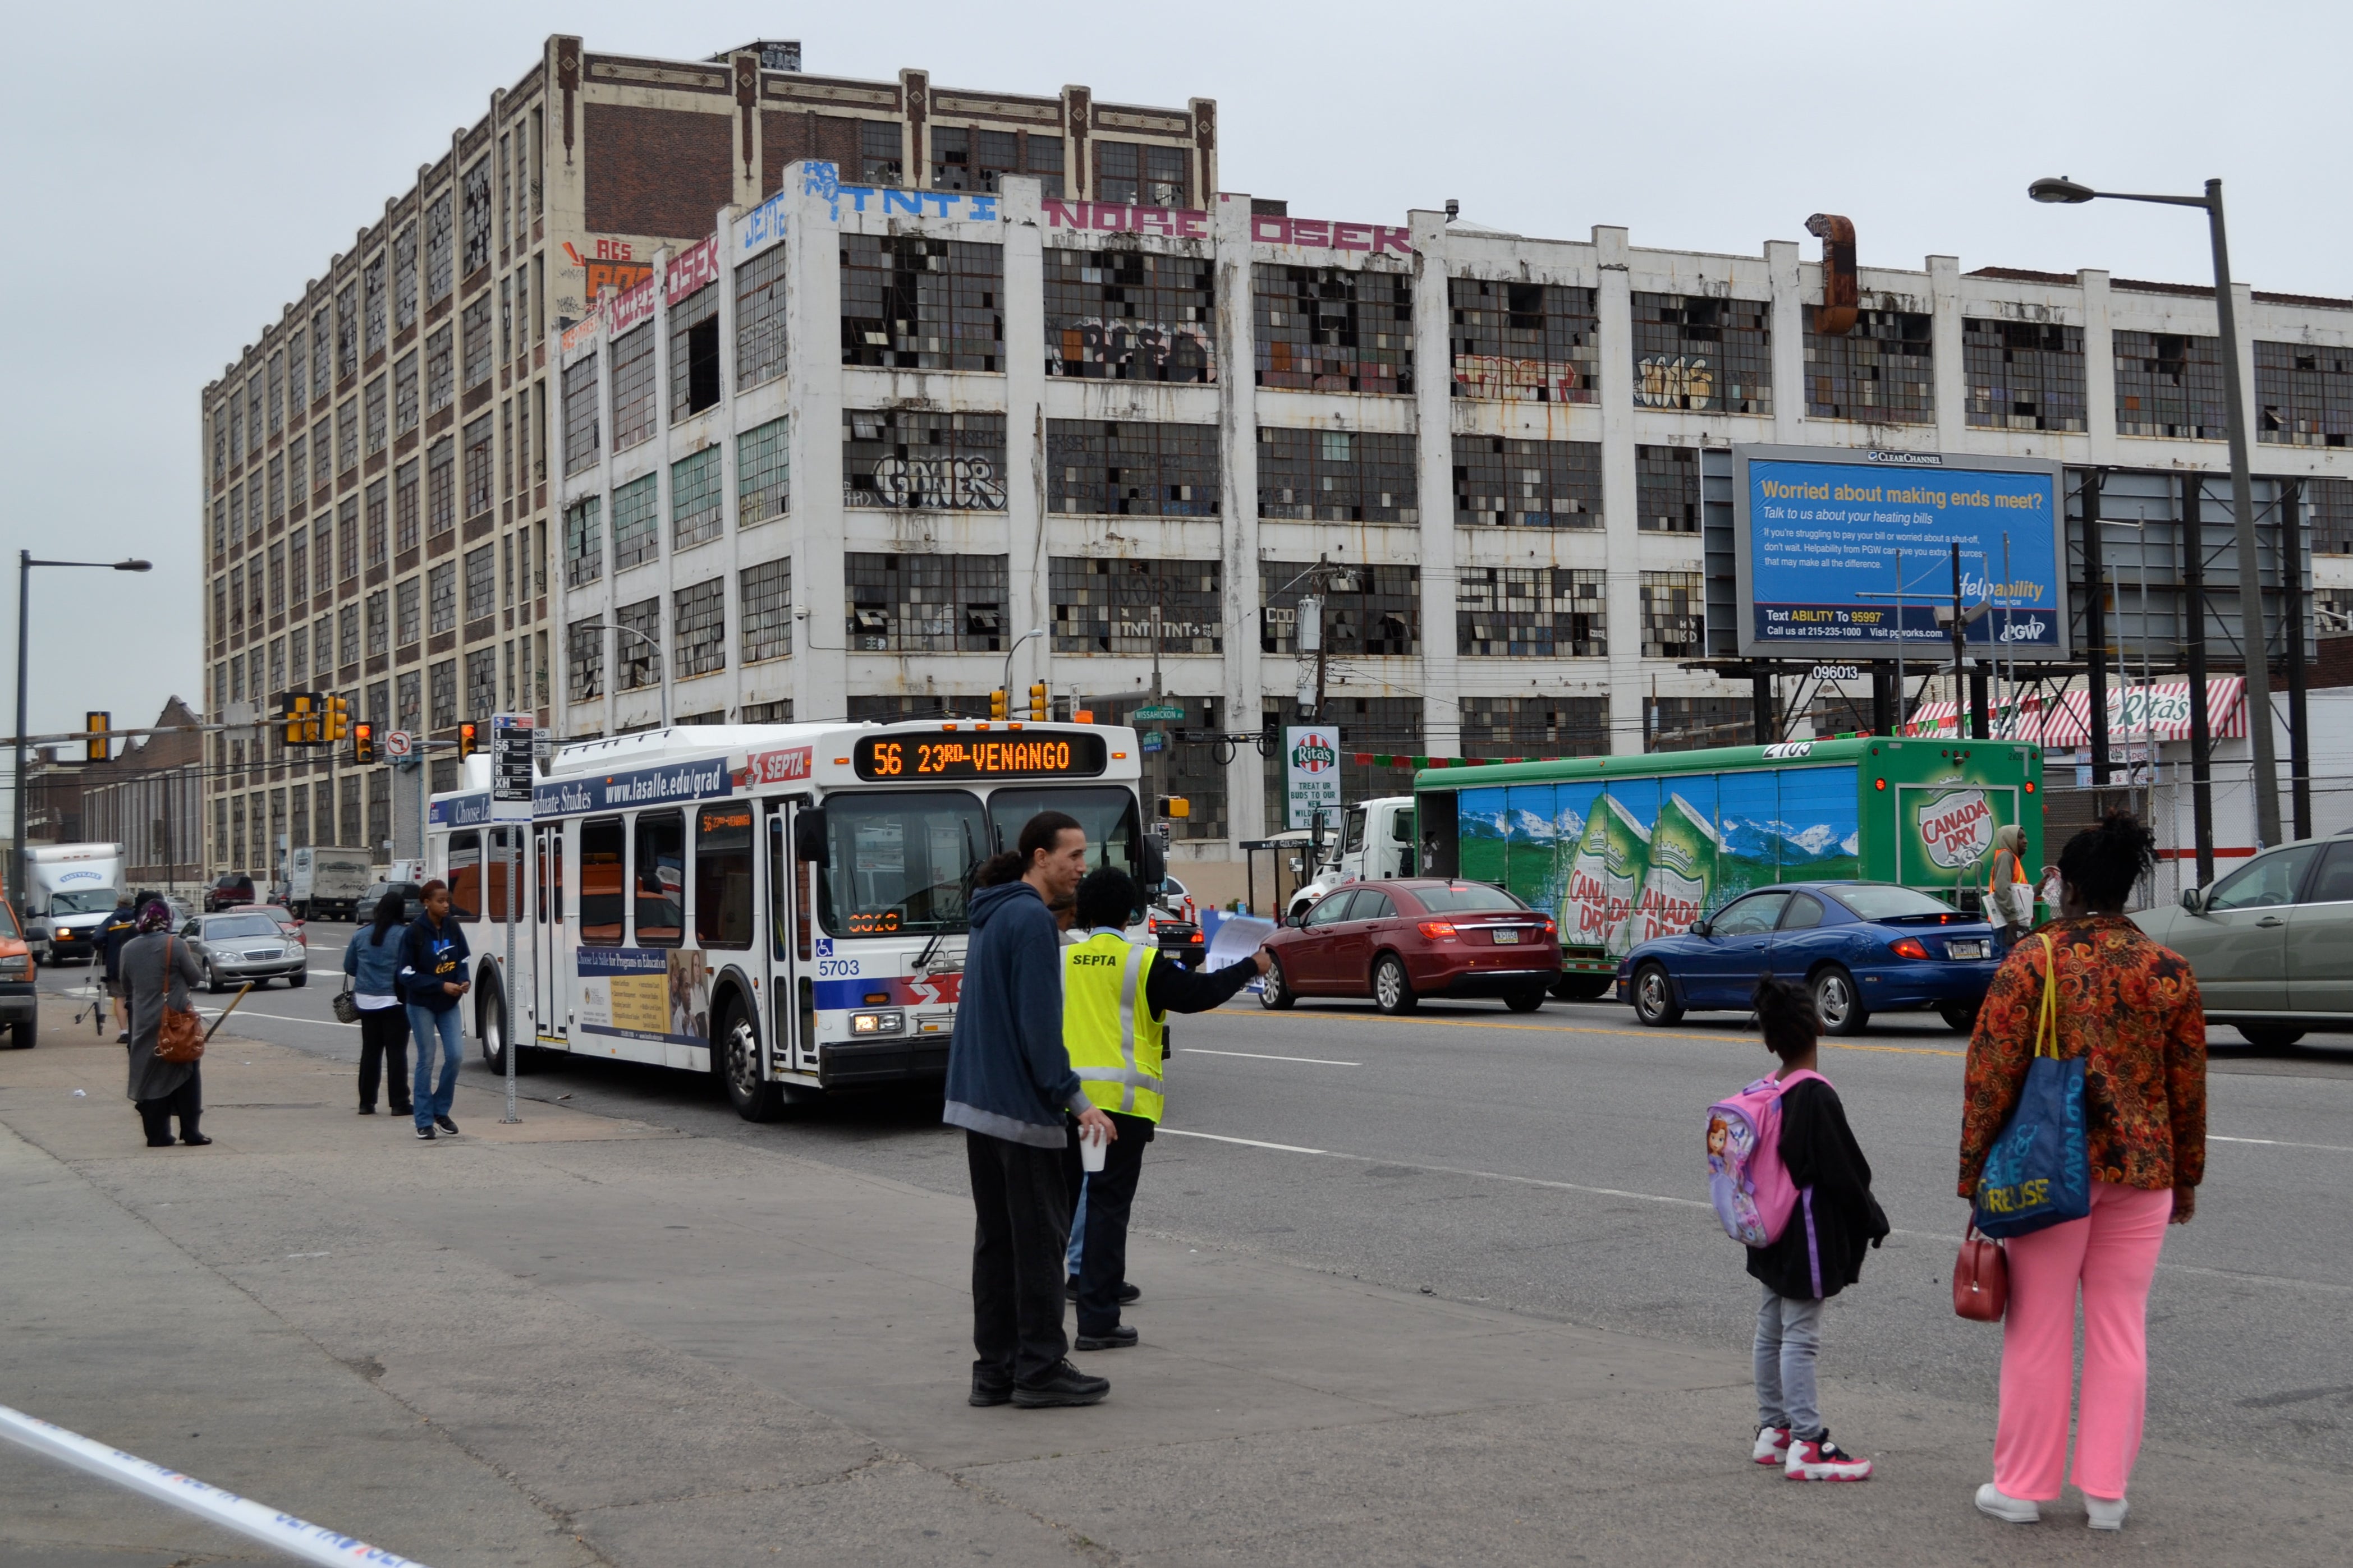 The 23rd and Venango Bus Loop will double as a gateway for the local community